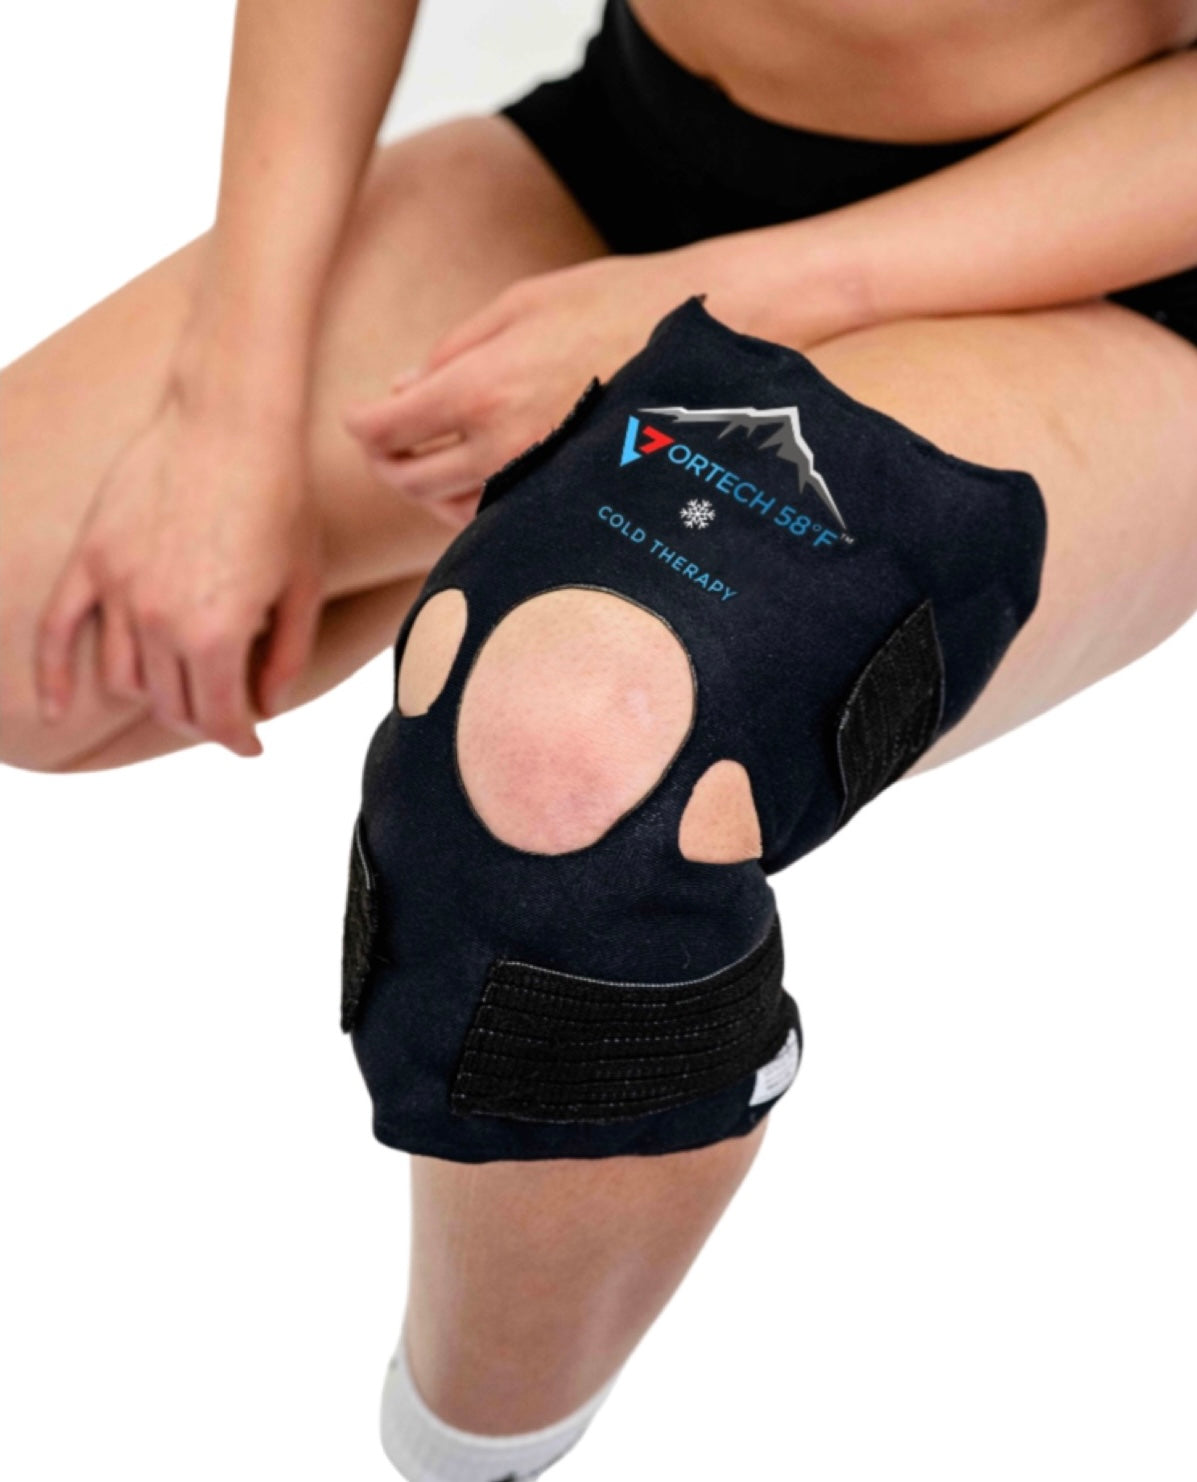 Vortech 58°F™ Cold Therapy Knee Wrap